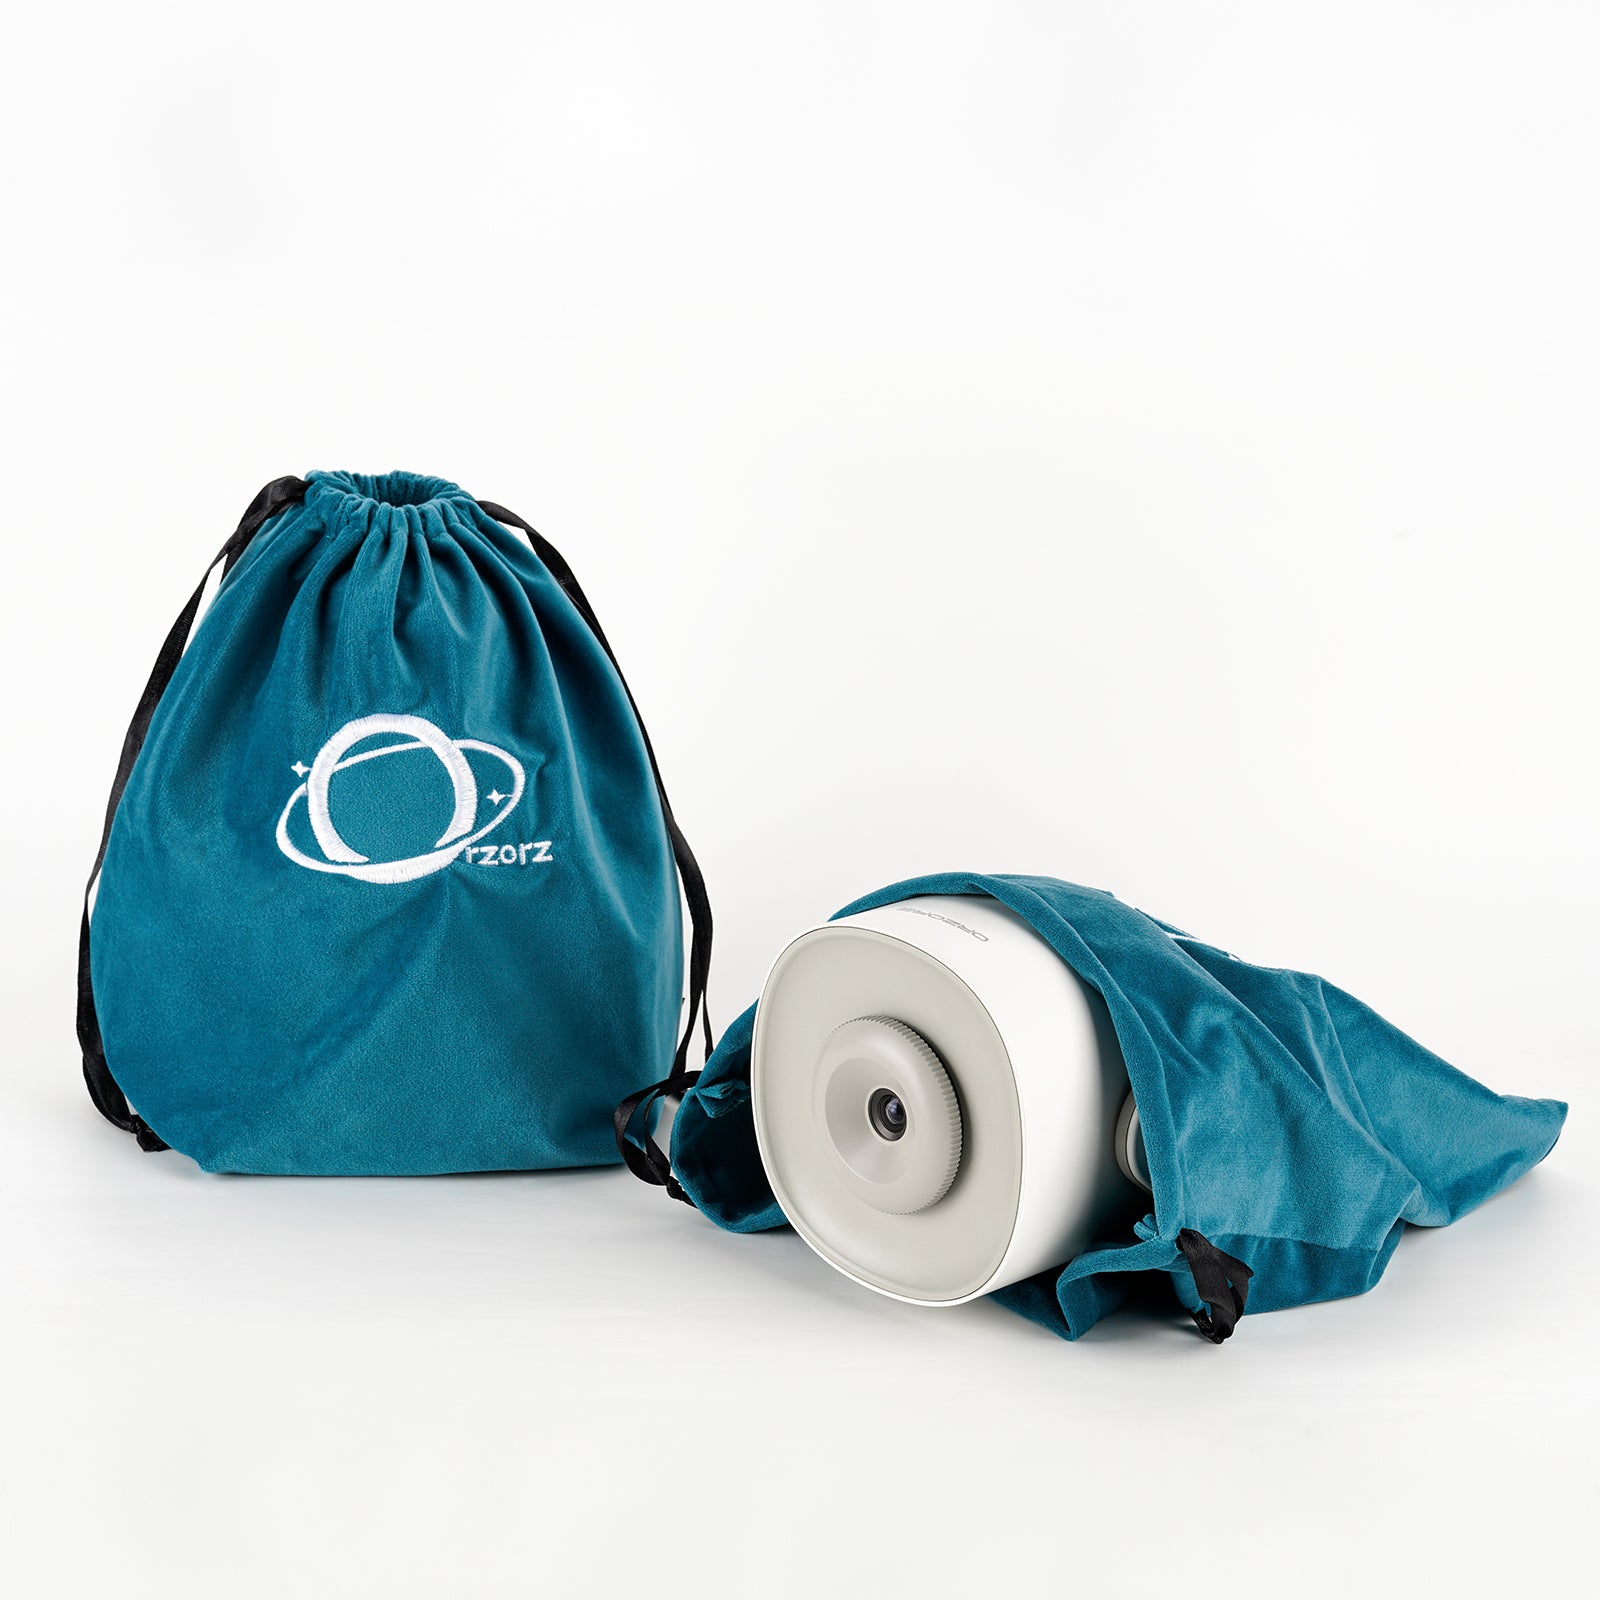 Orzorz Dust Cover Storage Bags Flannel with Satin Drawstring Pouch For Star Projector, Slide discs,Accessories, Gift Bag, with Flexible Uses (6.23x5.51x10.23 inches, Teal Blue)